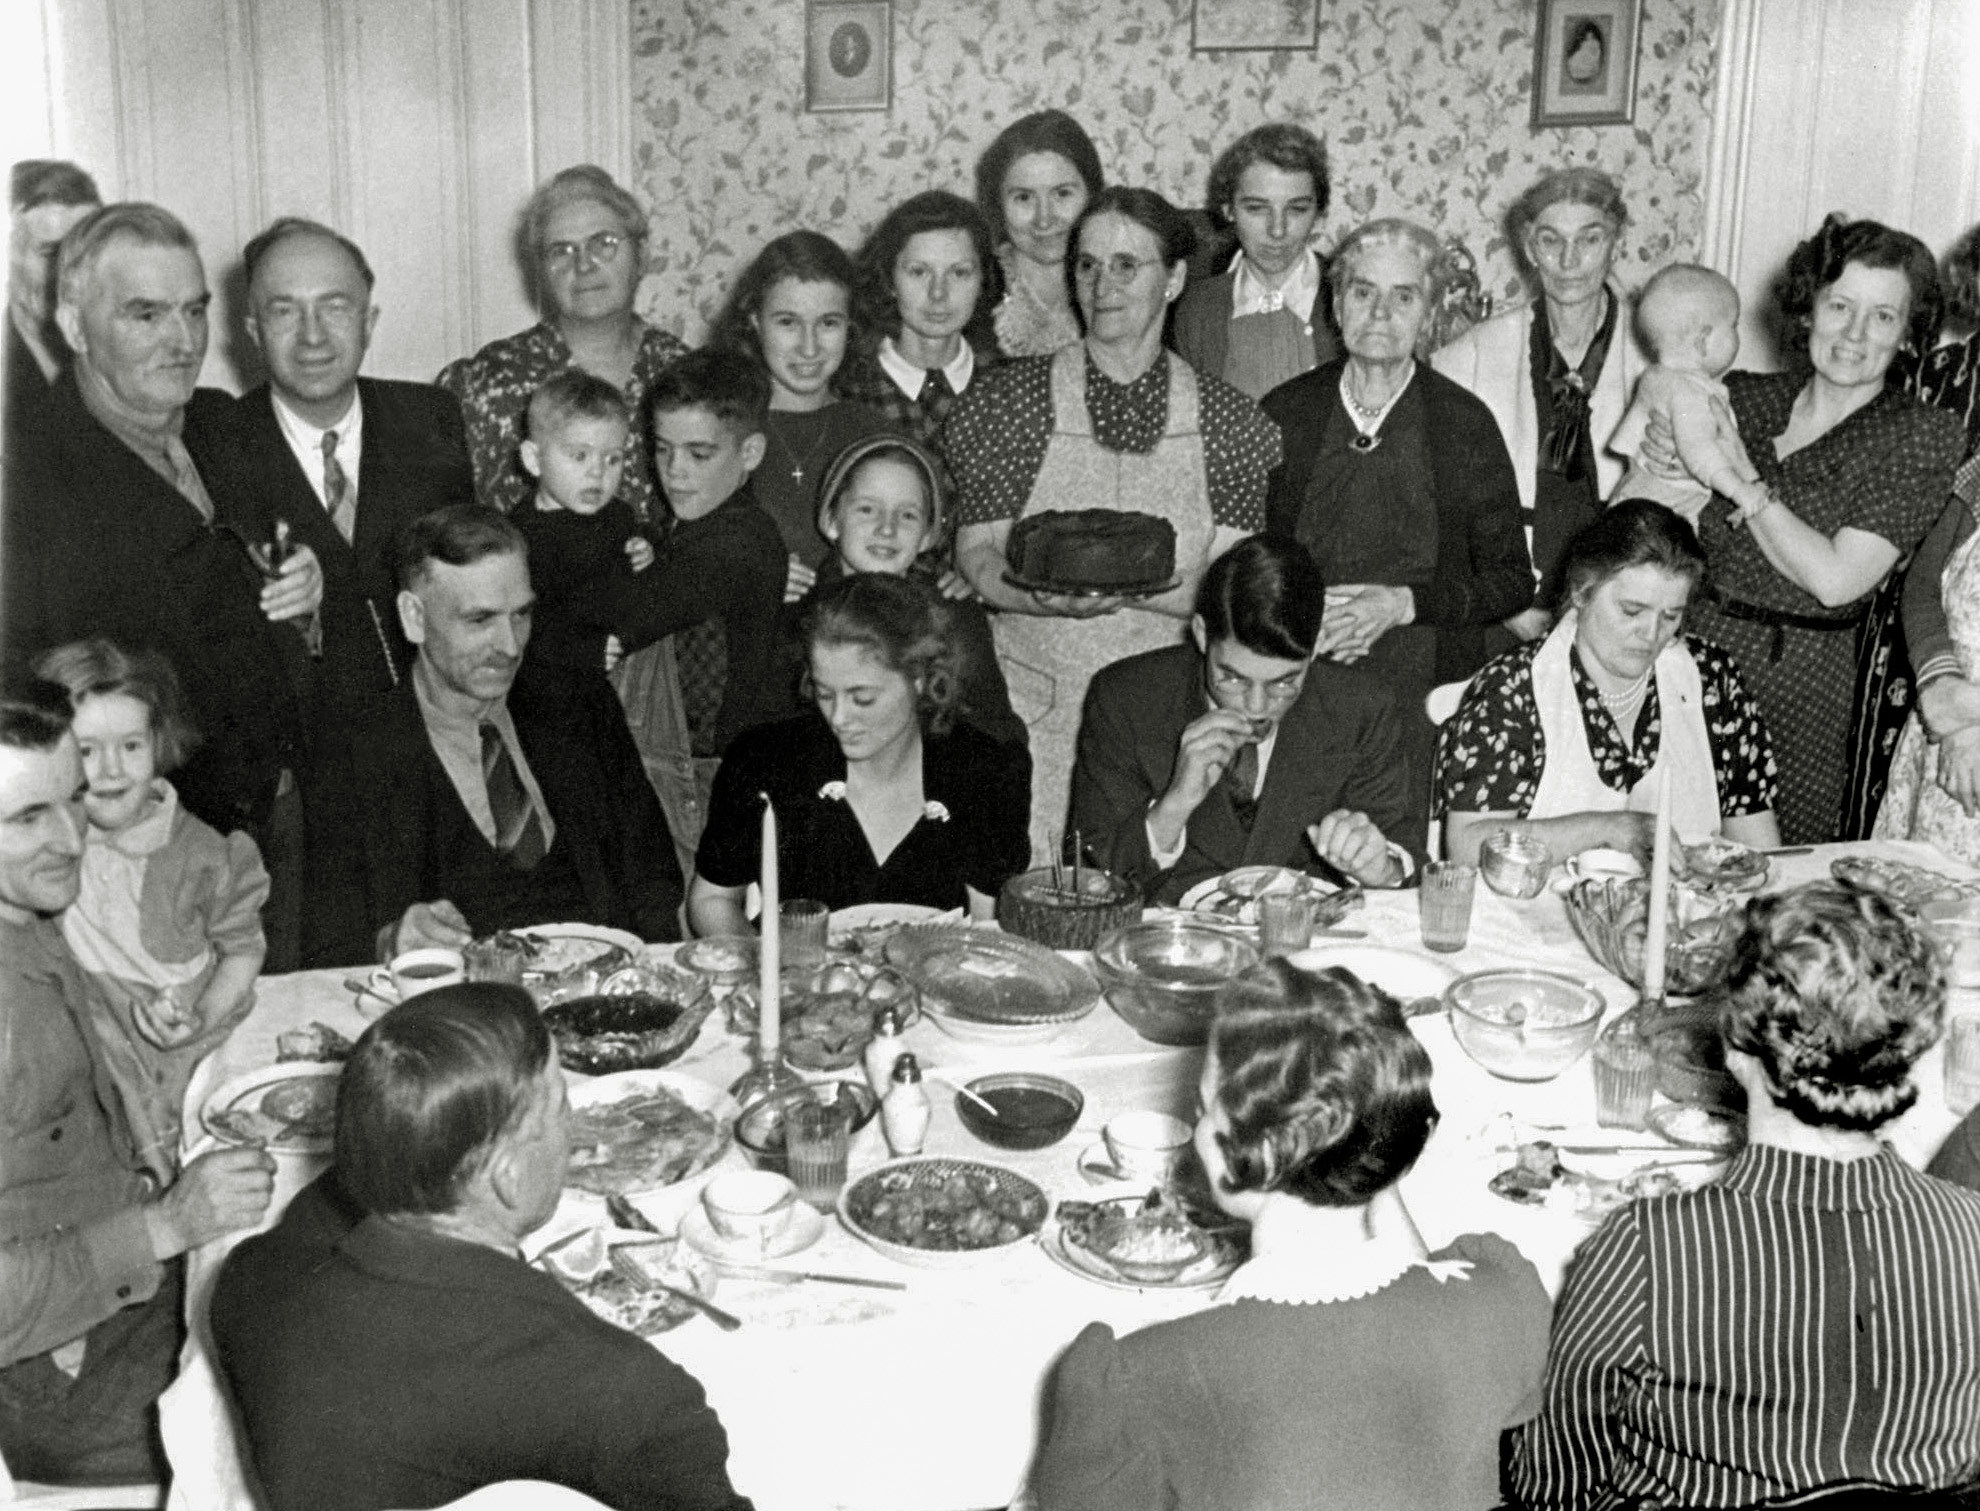 Baugher family, Elkton, Virginia. Christmas Eve, 1939. Seated facing the photographer: my grandfather, my dad's sister, my dad and my grandmother (seated, wearing the apron). I understand that she was a very skilled cook. The cake must have been a good one - it takes center stage. View full size.